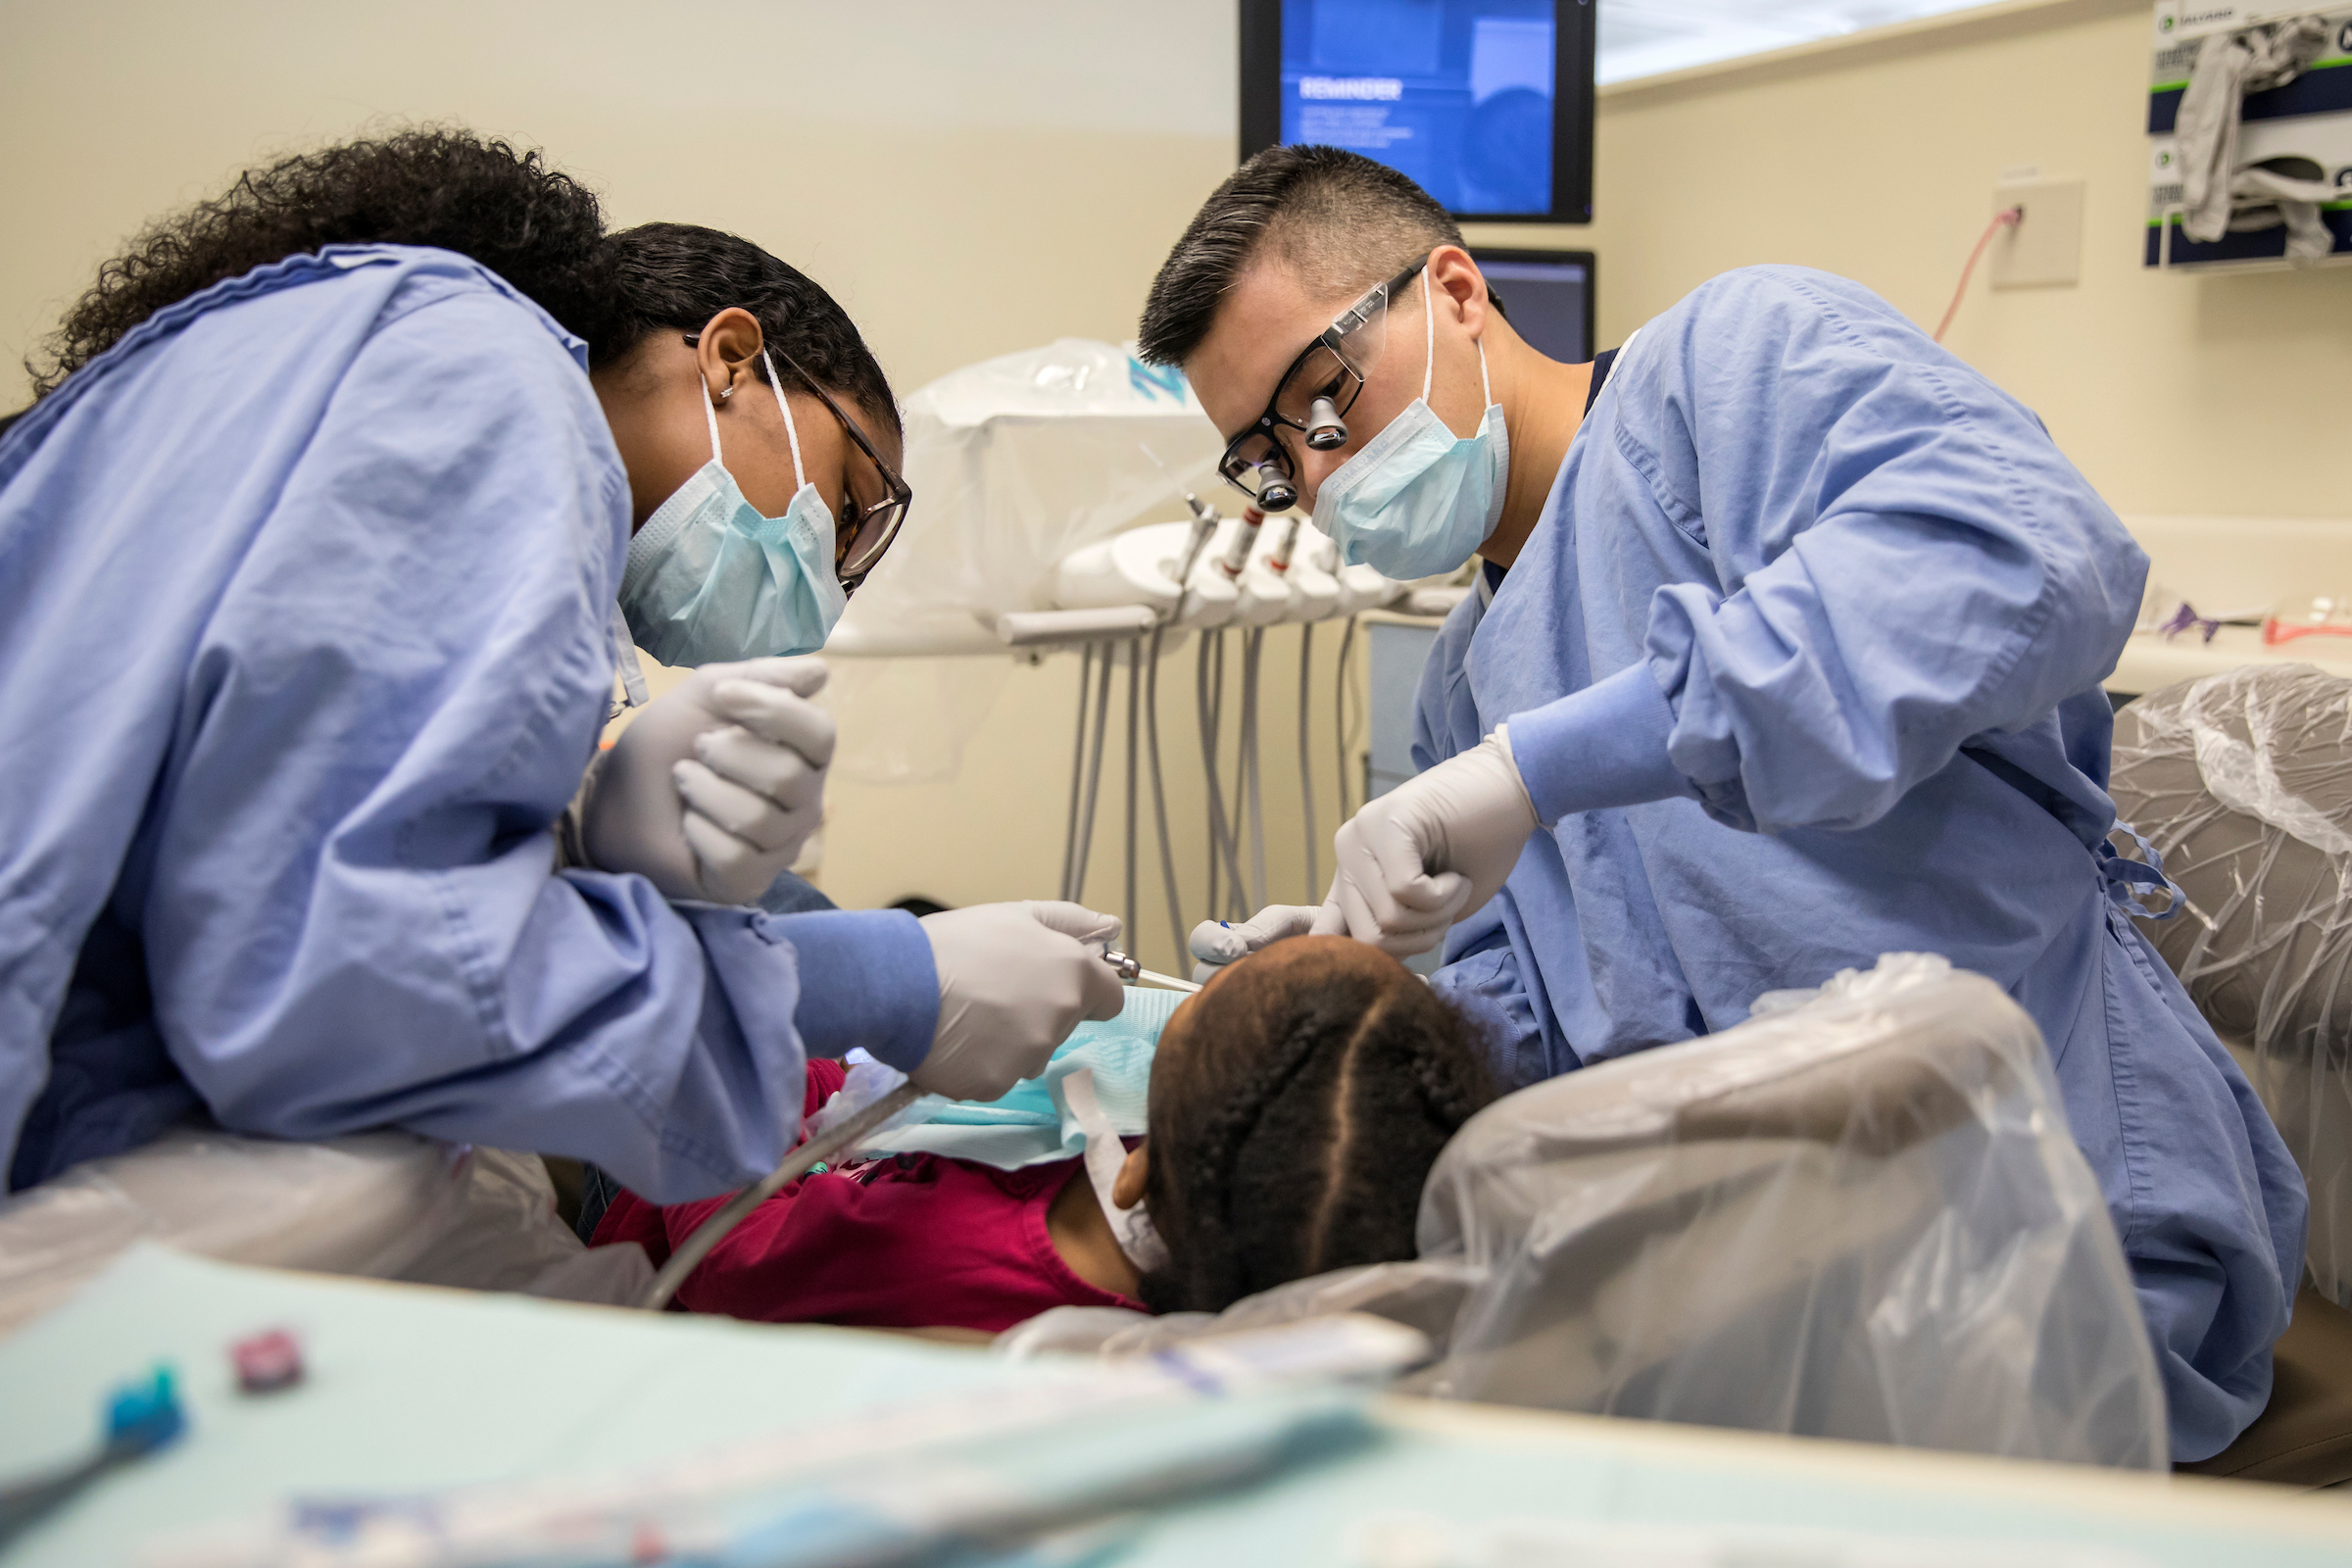 Advanced Education in General Dentistry Program - Adams School of Dentistry : Adams School of Dentistry